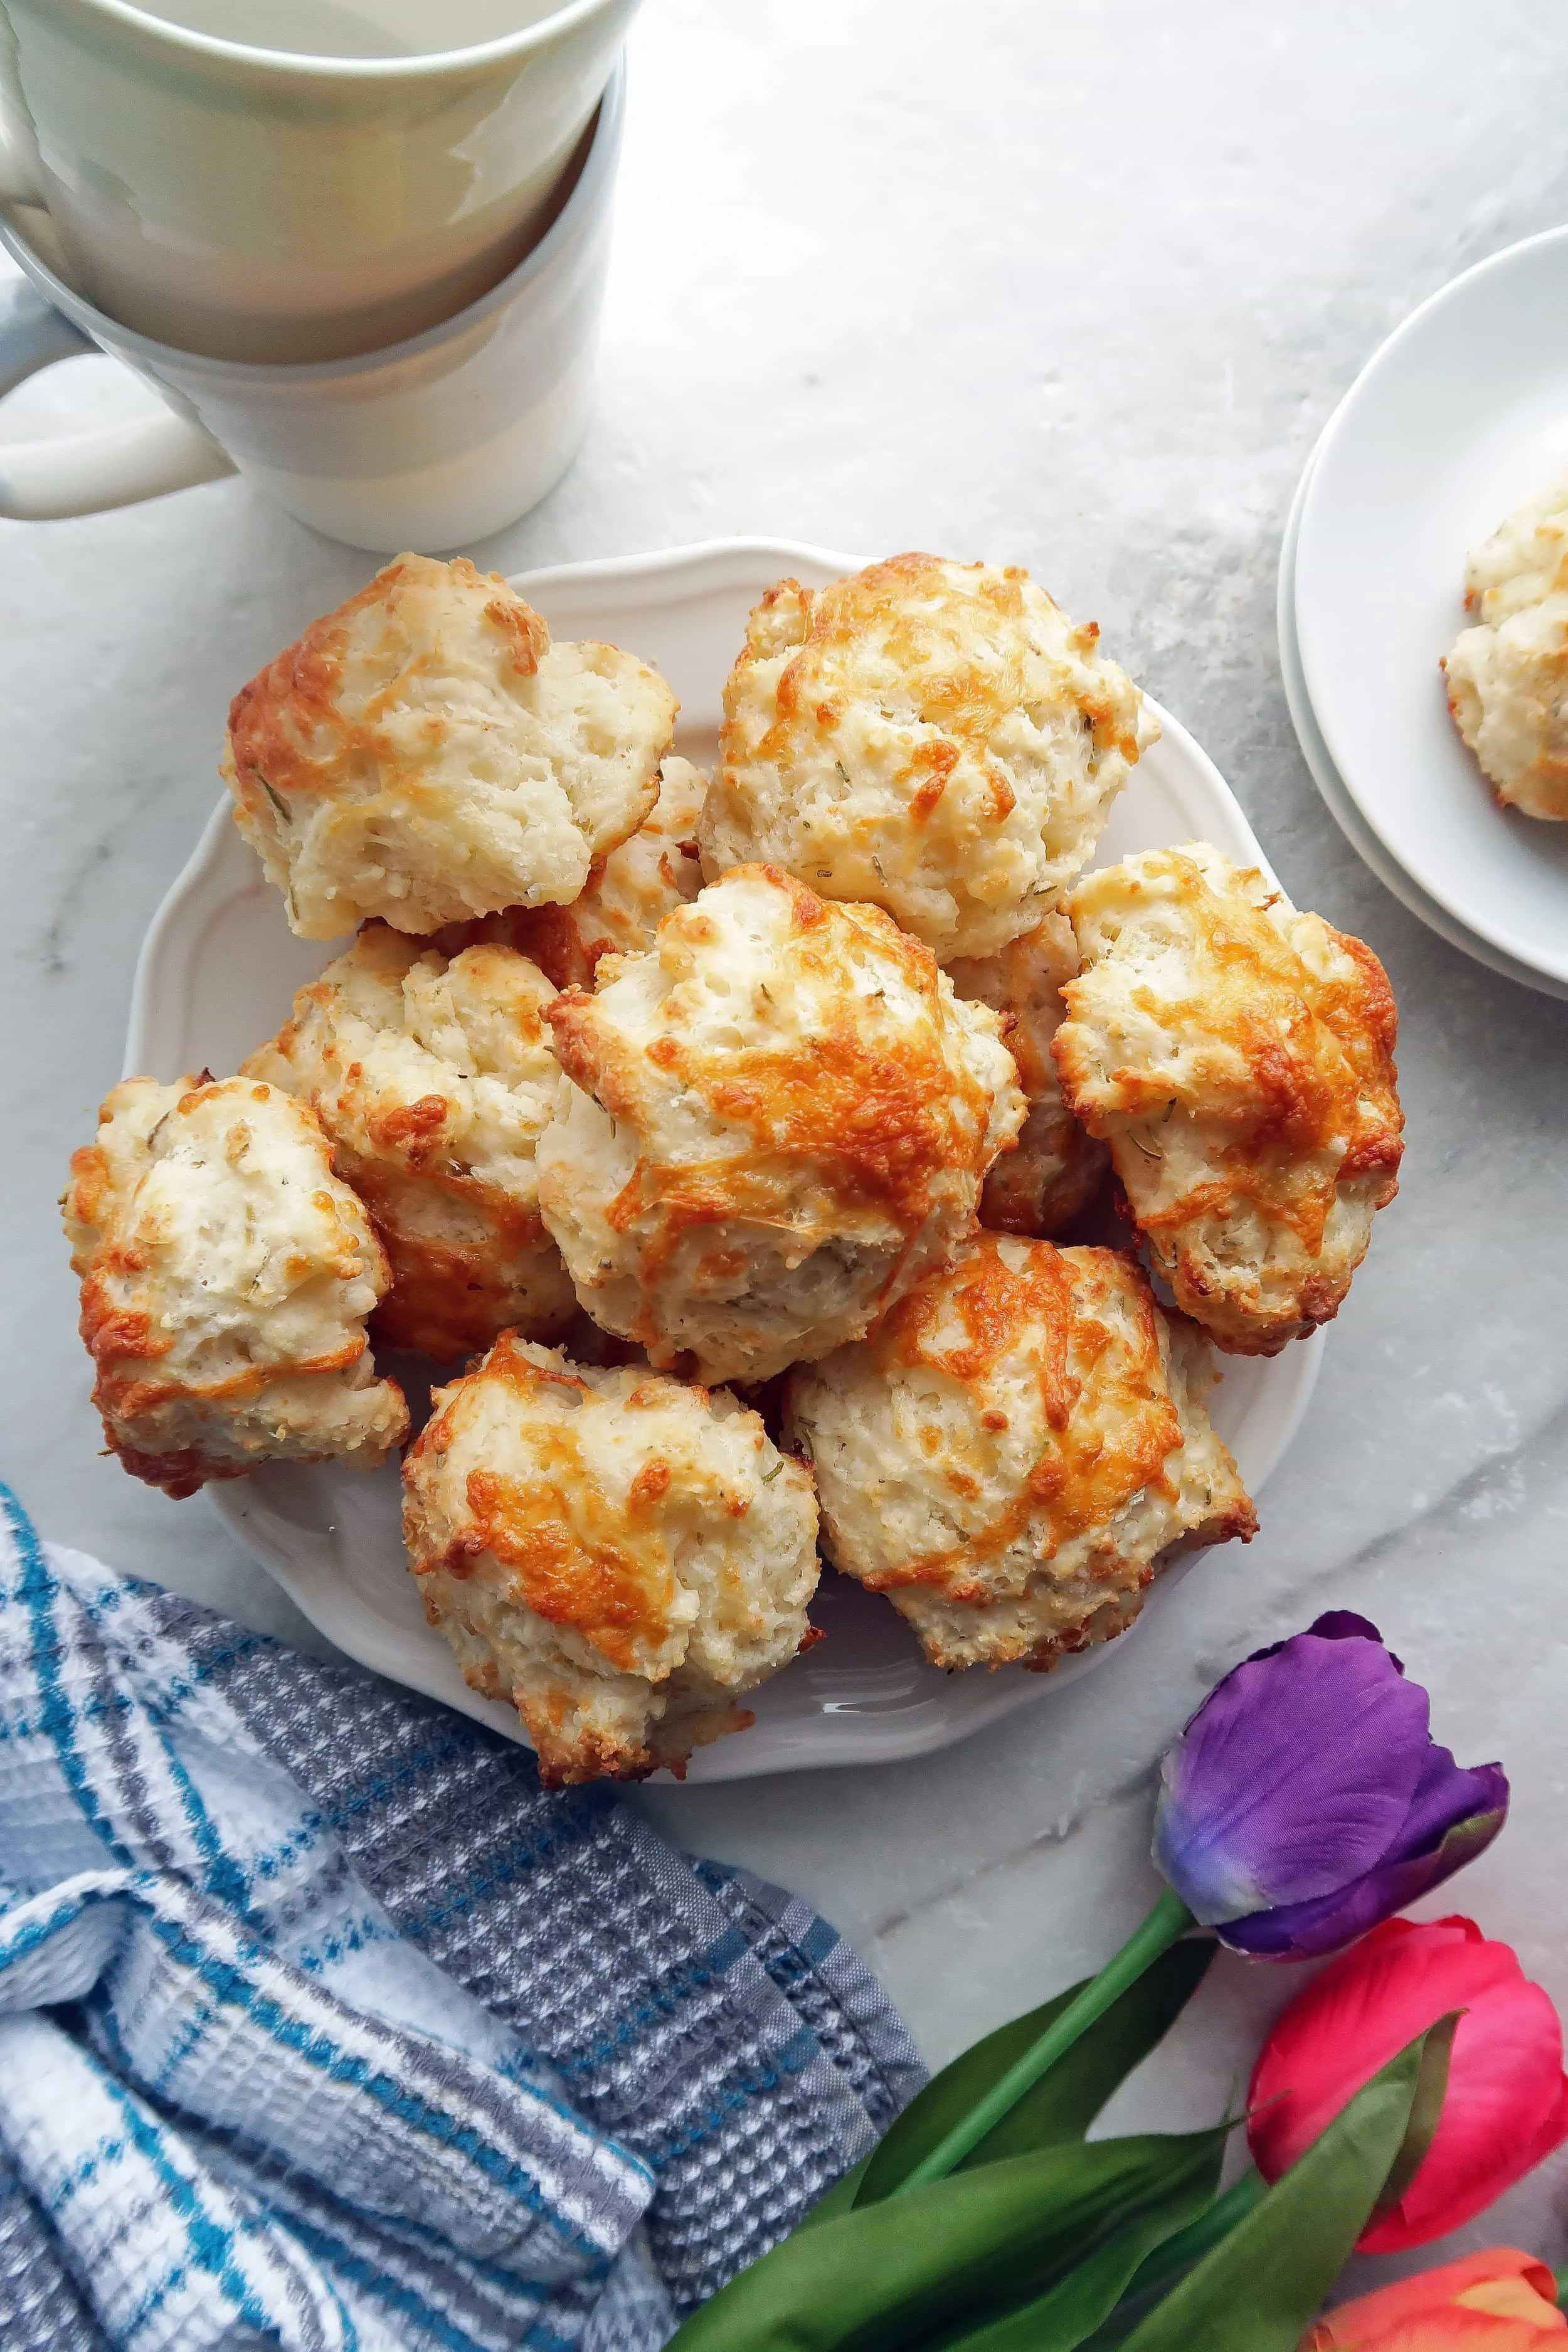 Overhead view of Quick Rosemary Cheddar Drop Biscuits piled on a white plate; tulips, a kitchen towel, cups, and plates around them.